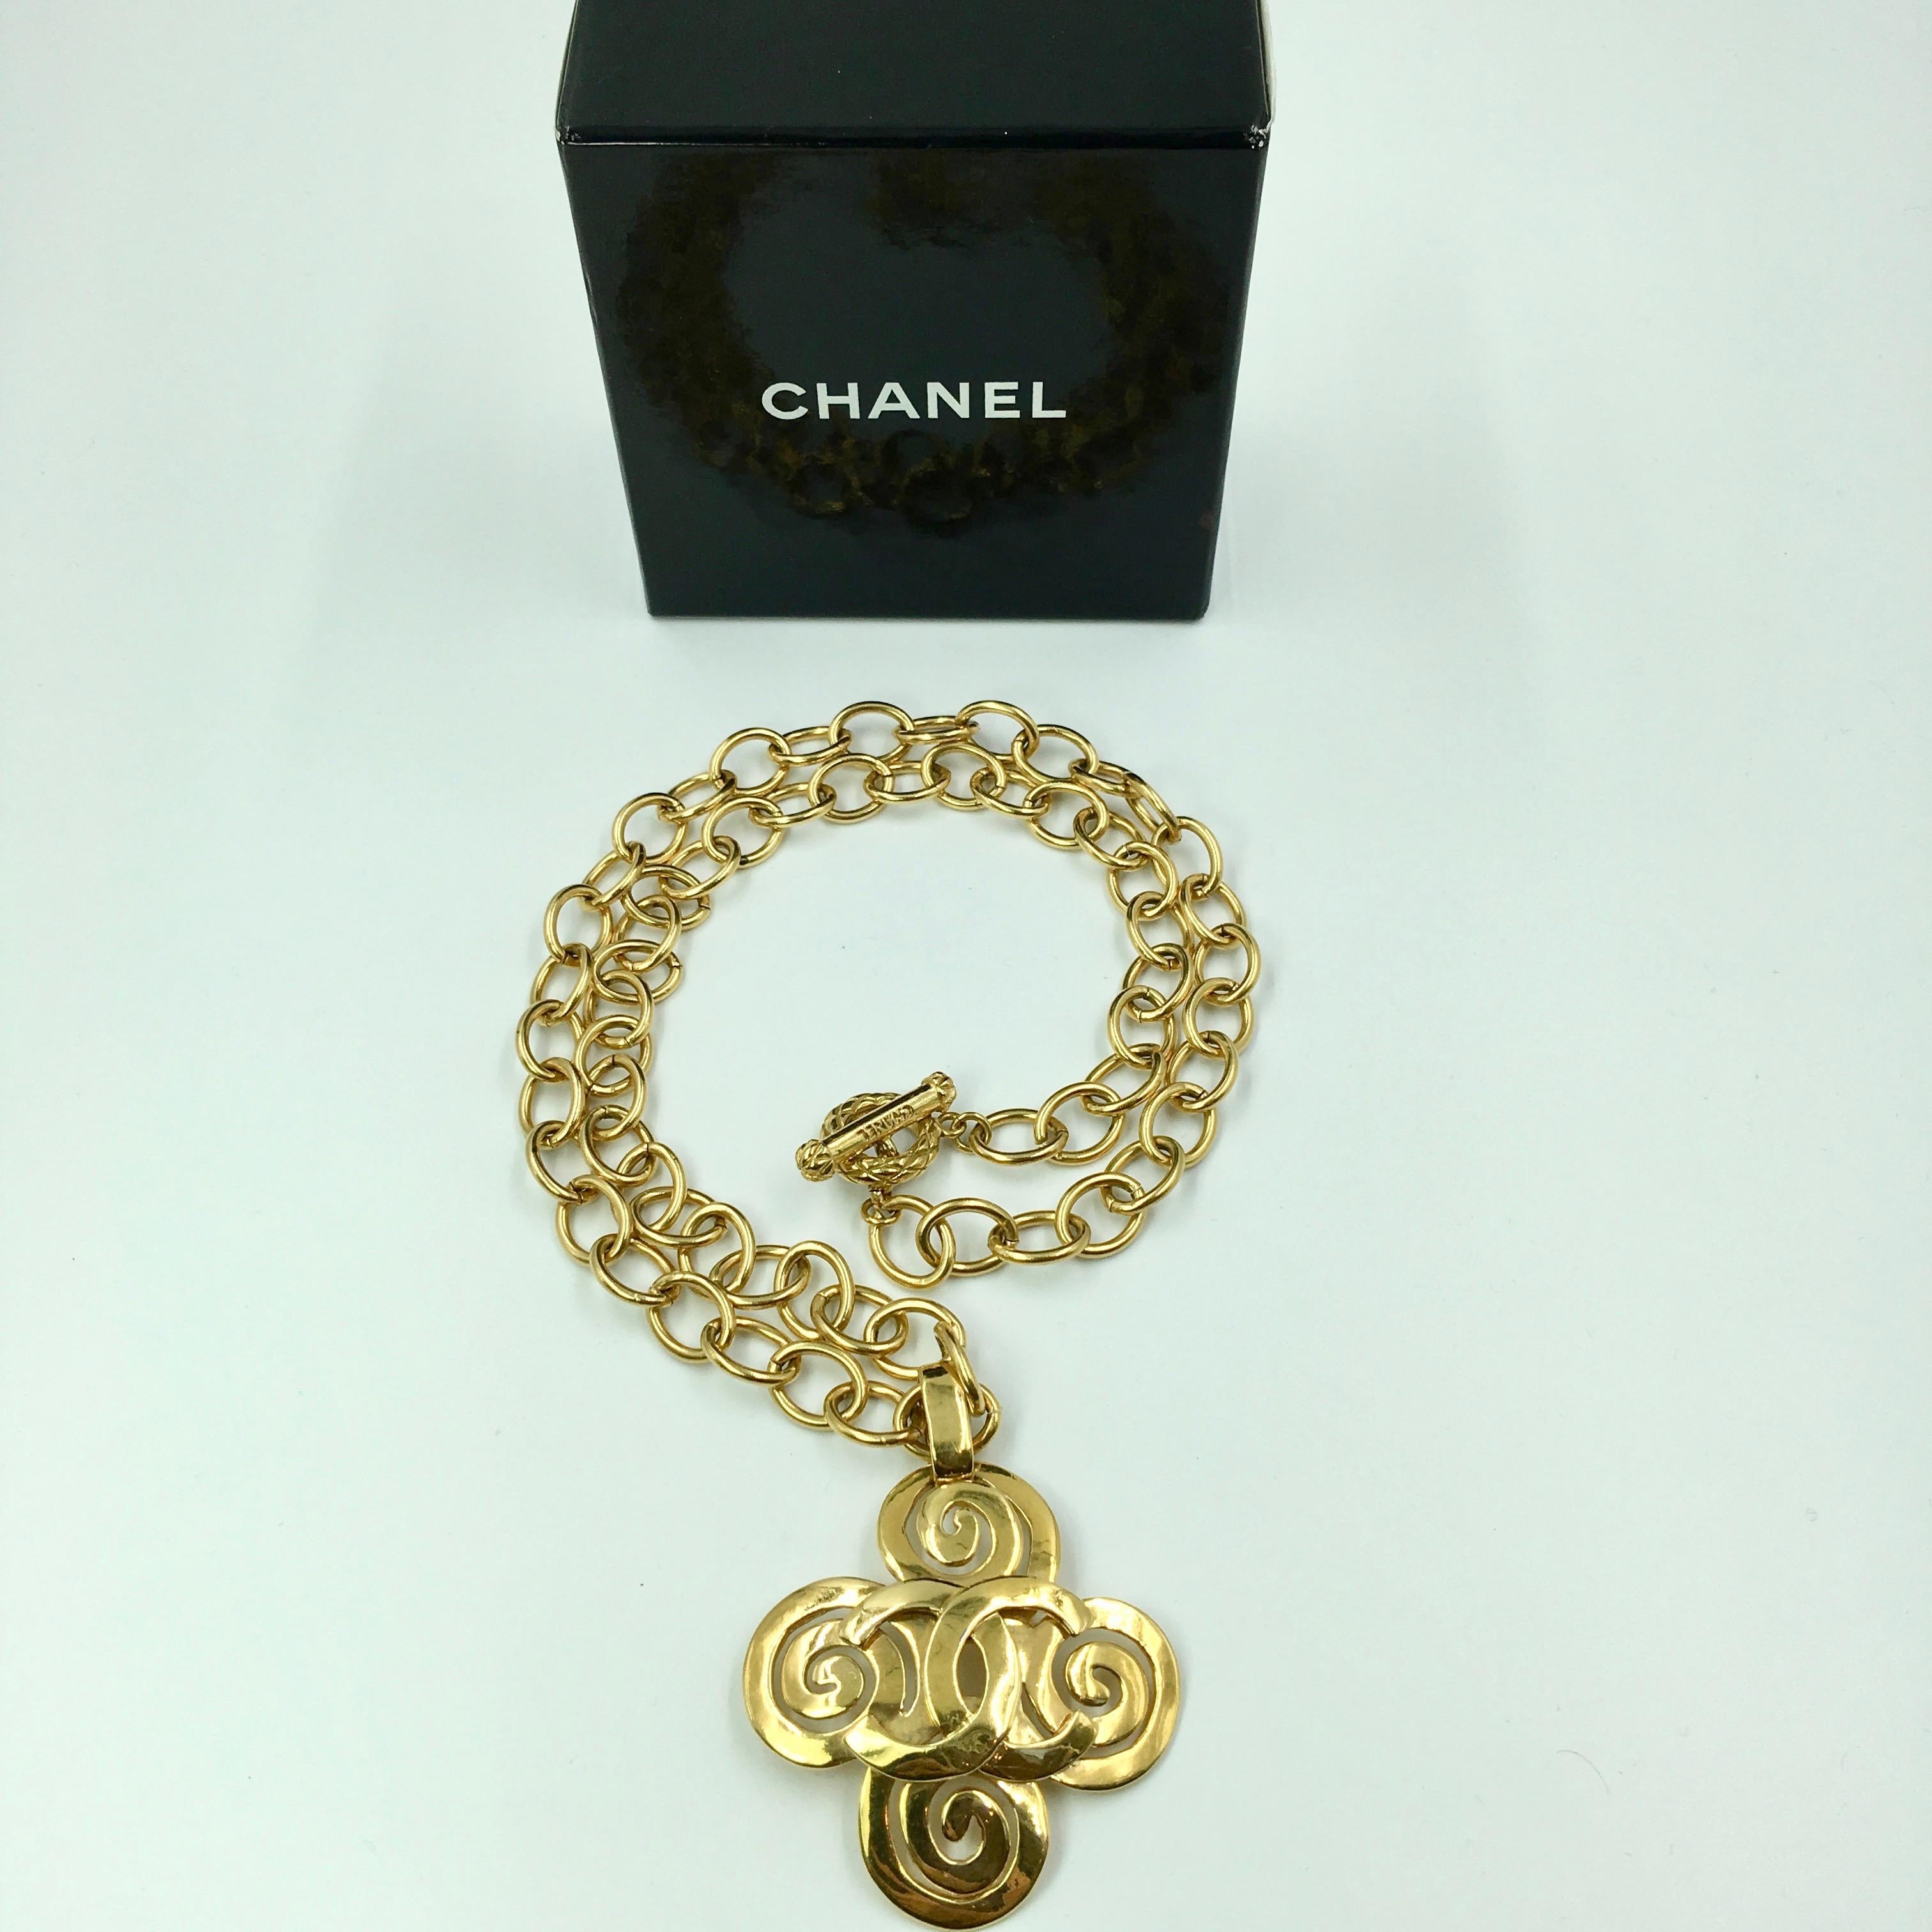 Chanel Gold Tone CC Logo Swirl Cross Necklace. Stamped Chanel and Made In France. 
Good vintage condition. One chain link has a slight discoloration. It is not noticeable when worn. Please see last photo. 

Measurements are as follows:

Necklace